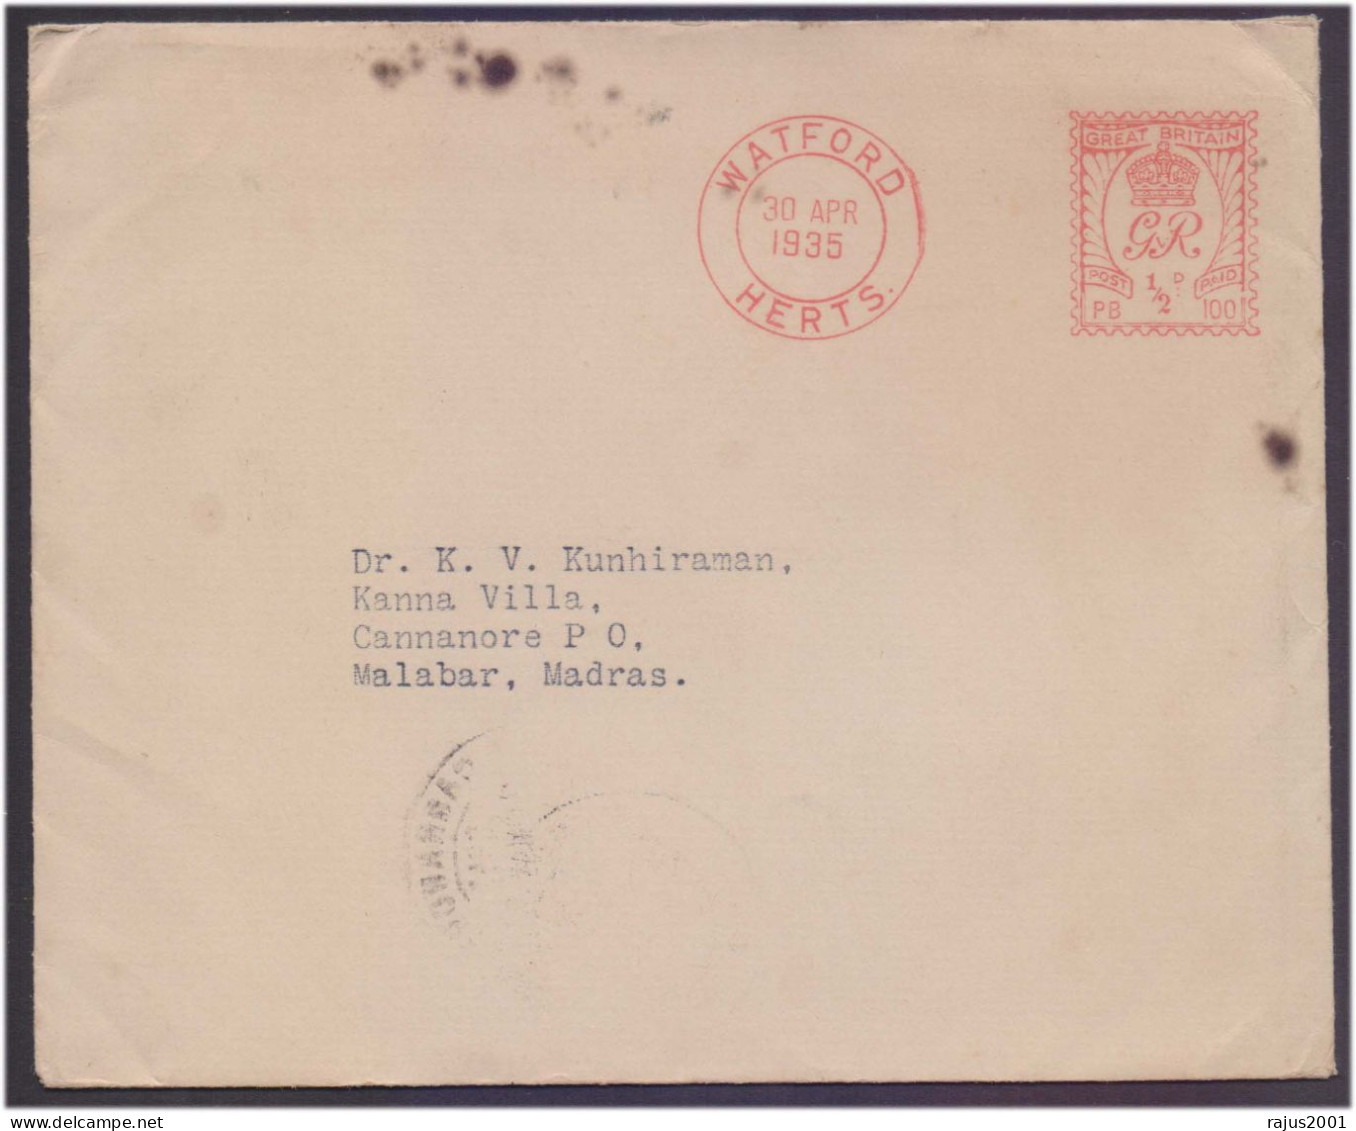 WATFORD HERTS EMA RED METER FRANK BRITAIN TO MALABAR MADRAS INDIA CIRCULATED COVER 1935 CLEAR DELIVERY MARK As Scan - Franking Machines (EMA)